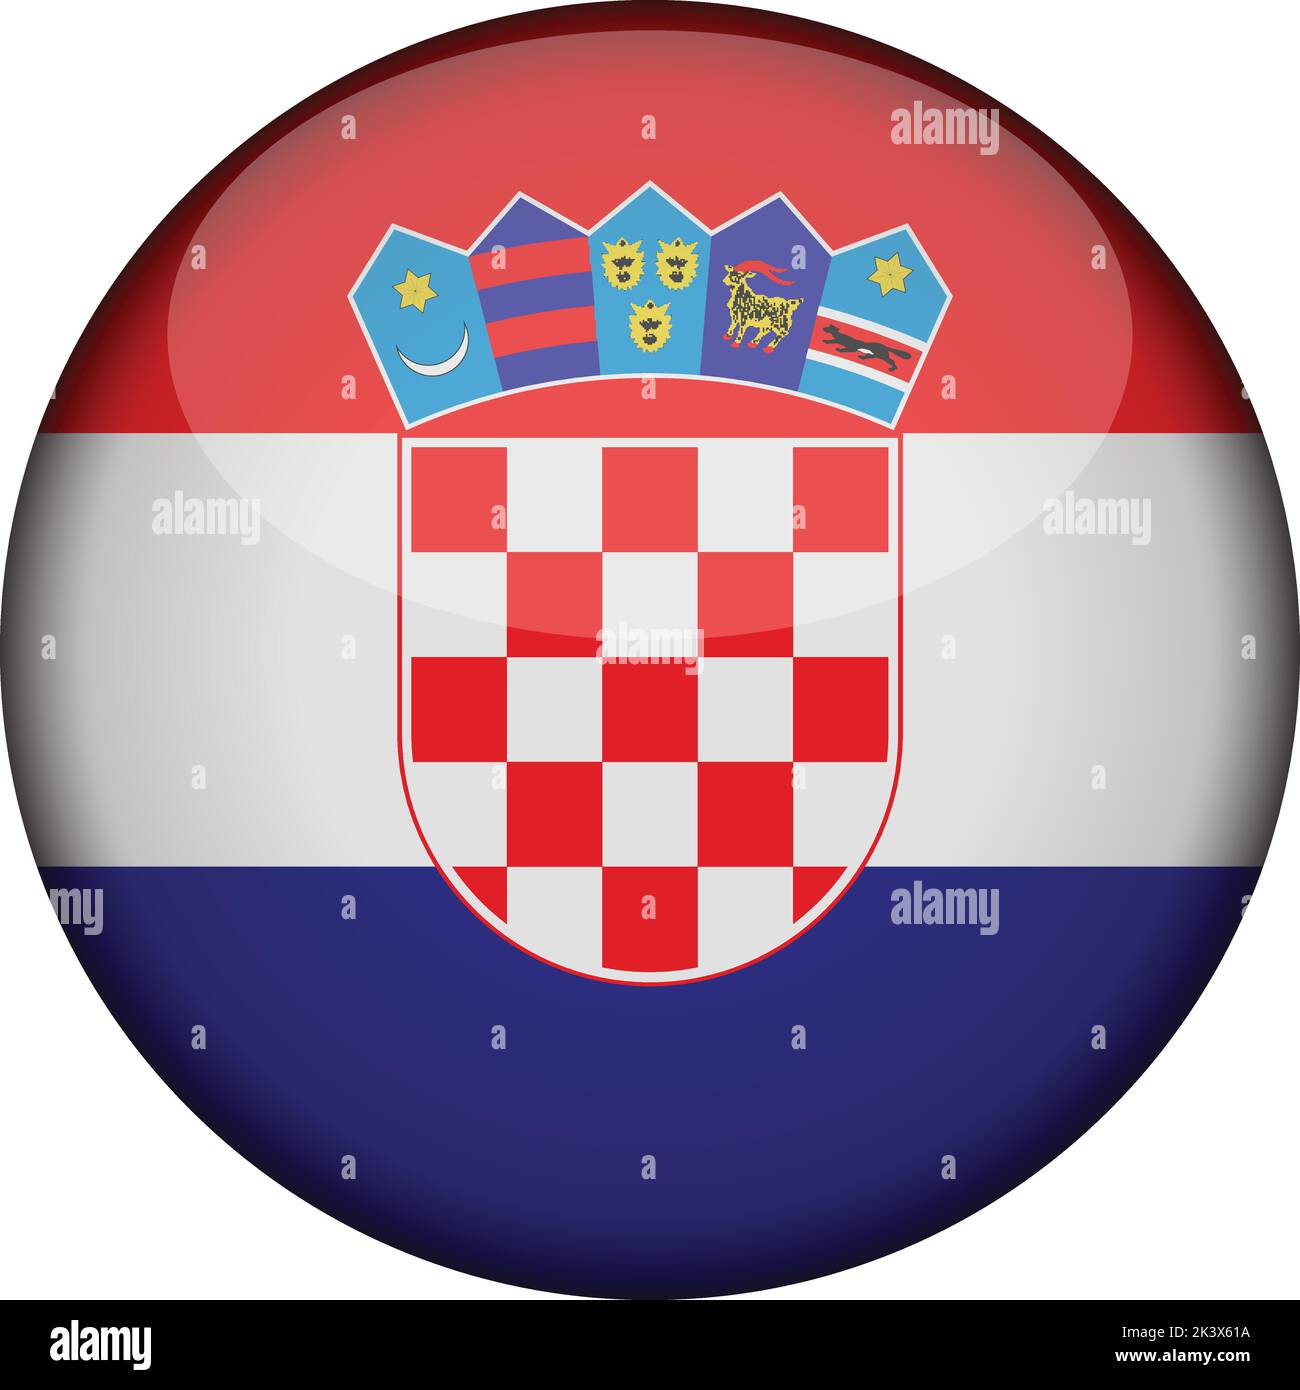 croatia Flag in glossy round button of icon. croatia emblem isolated on white background. National concept sign. Independence Day. Vector illustration Stock Vector